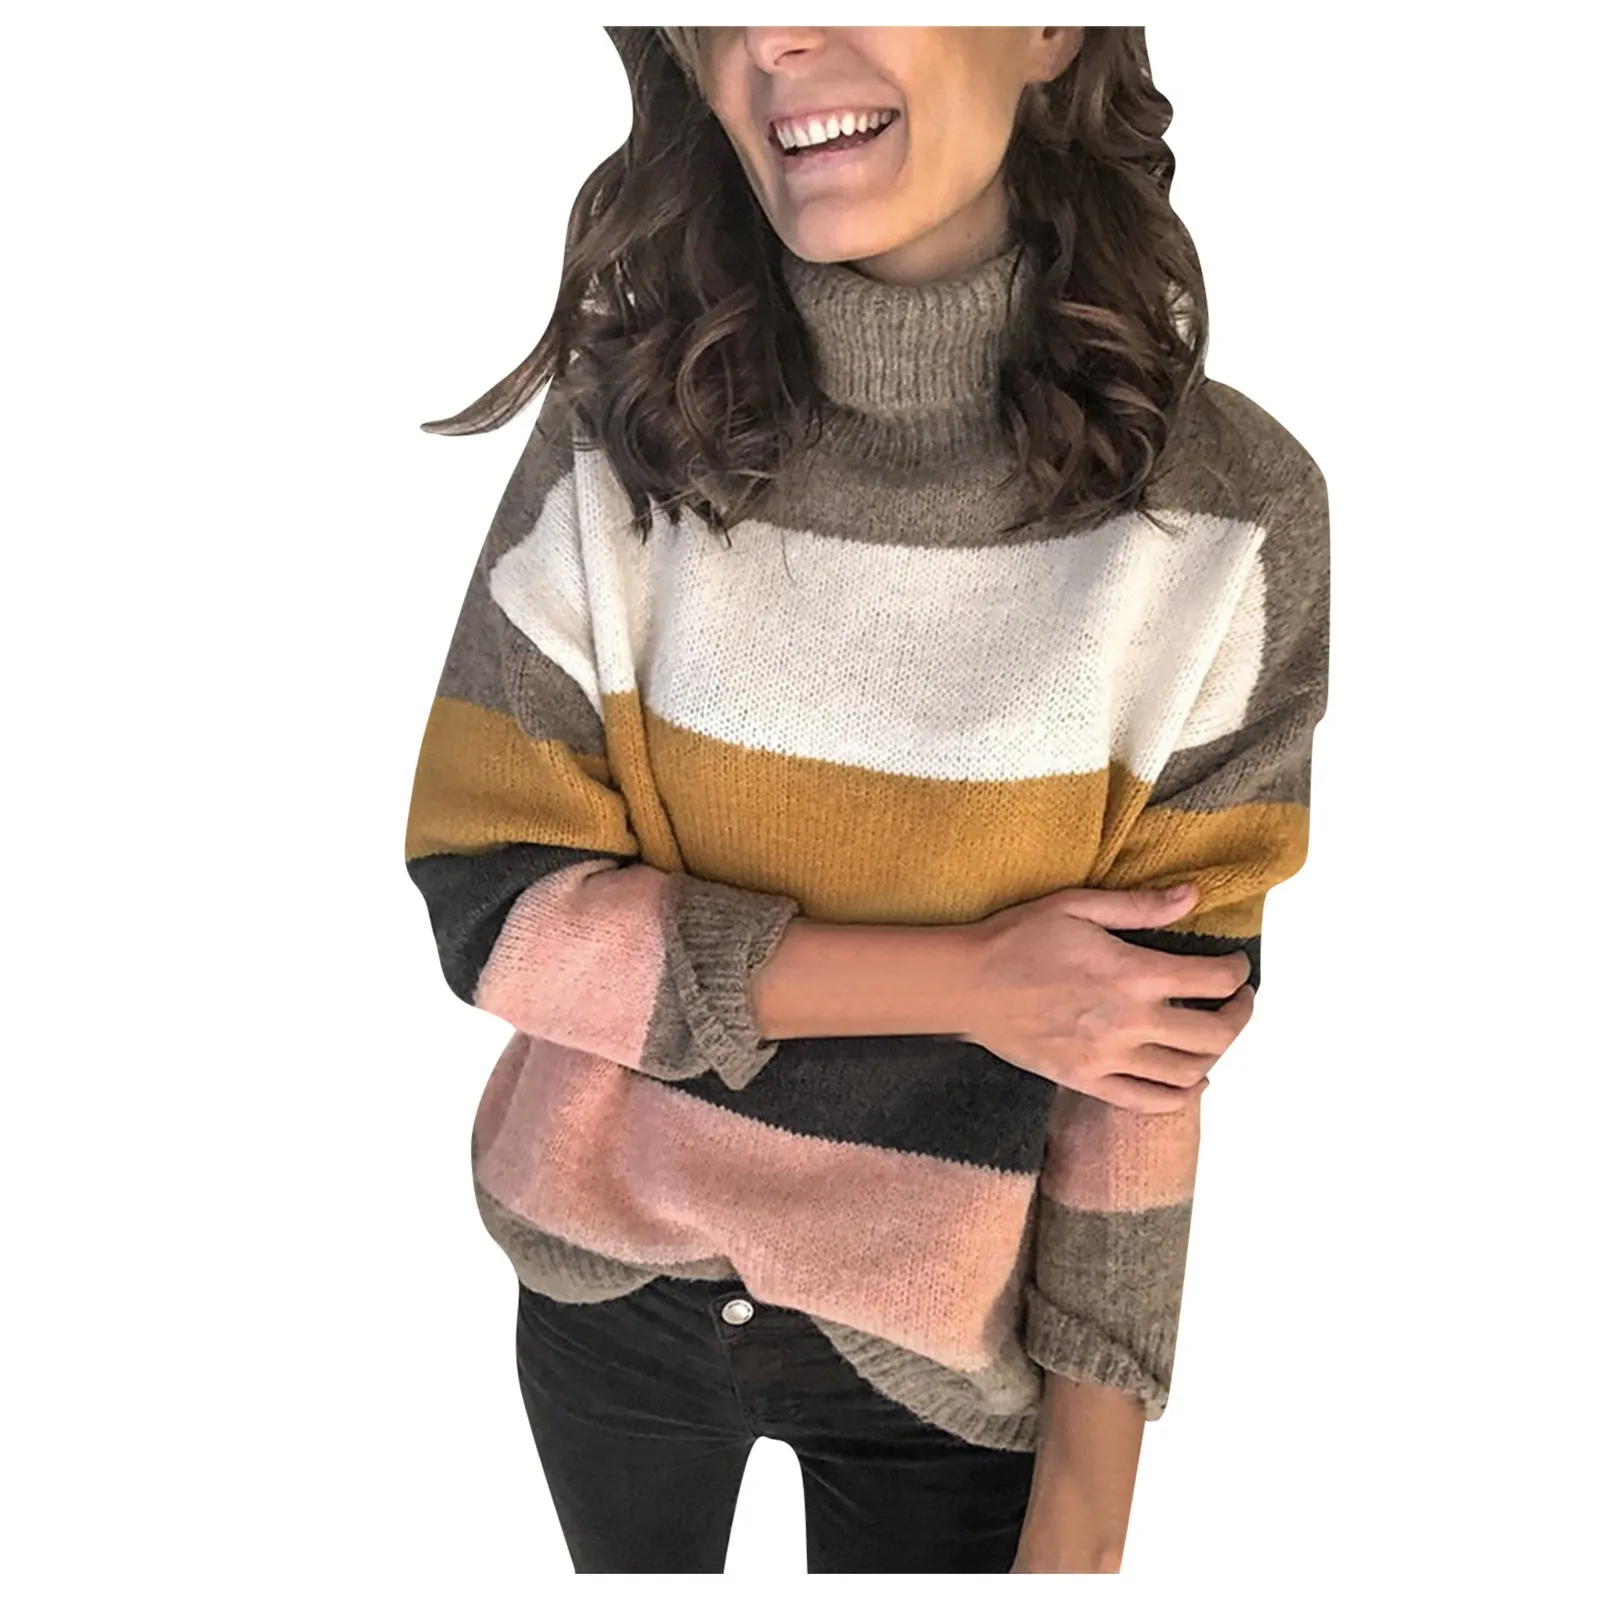 

Ladies High Neck Long Sleeve Color-Blocking Striped Knit Top Sweater Women'S Fall/Winter Fashion Casual Top Sweater Oversized